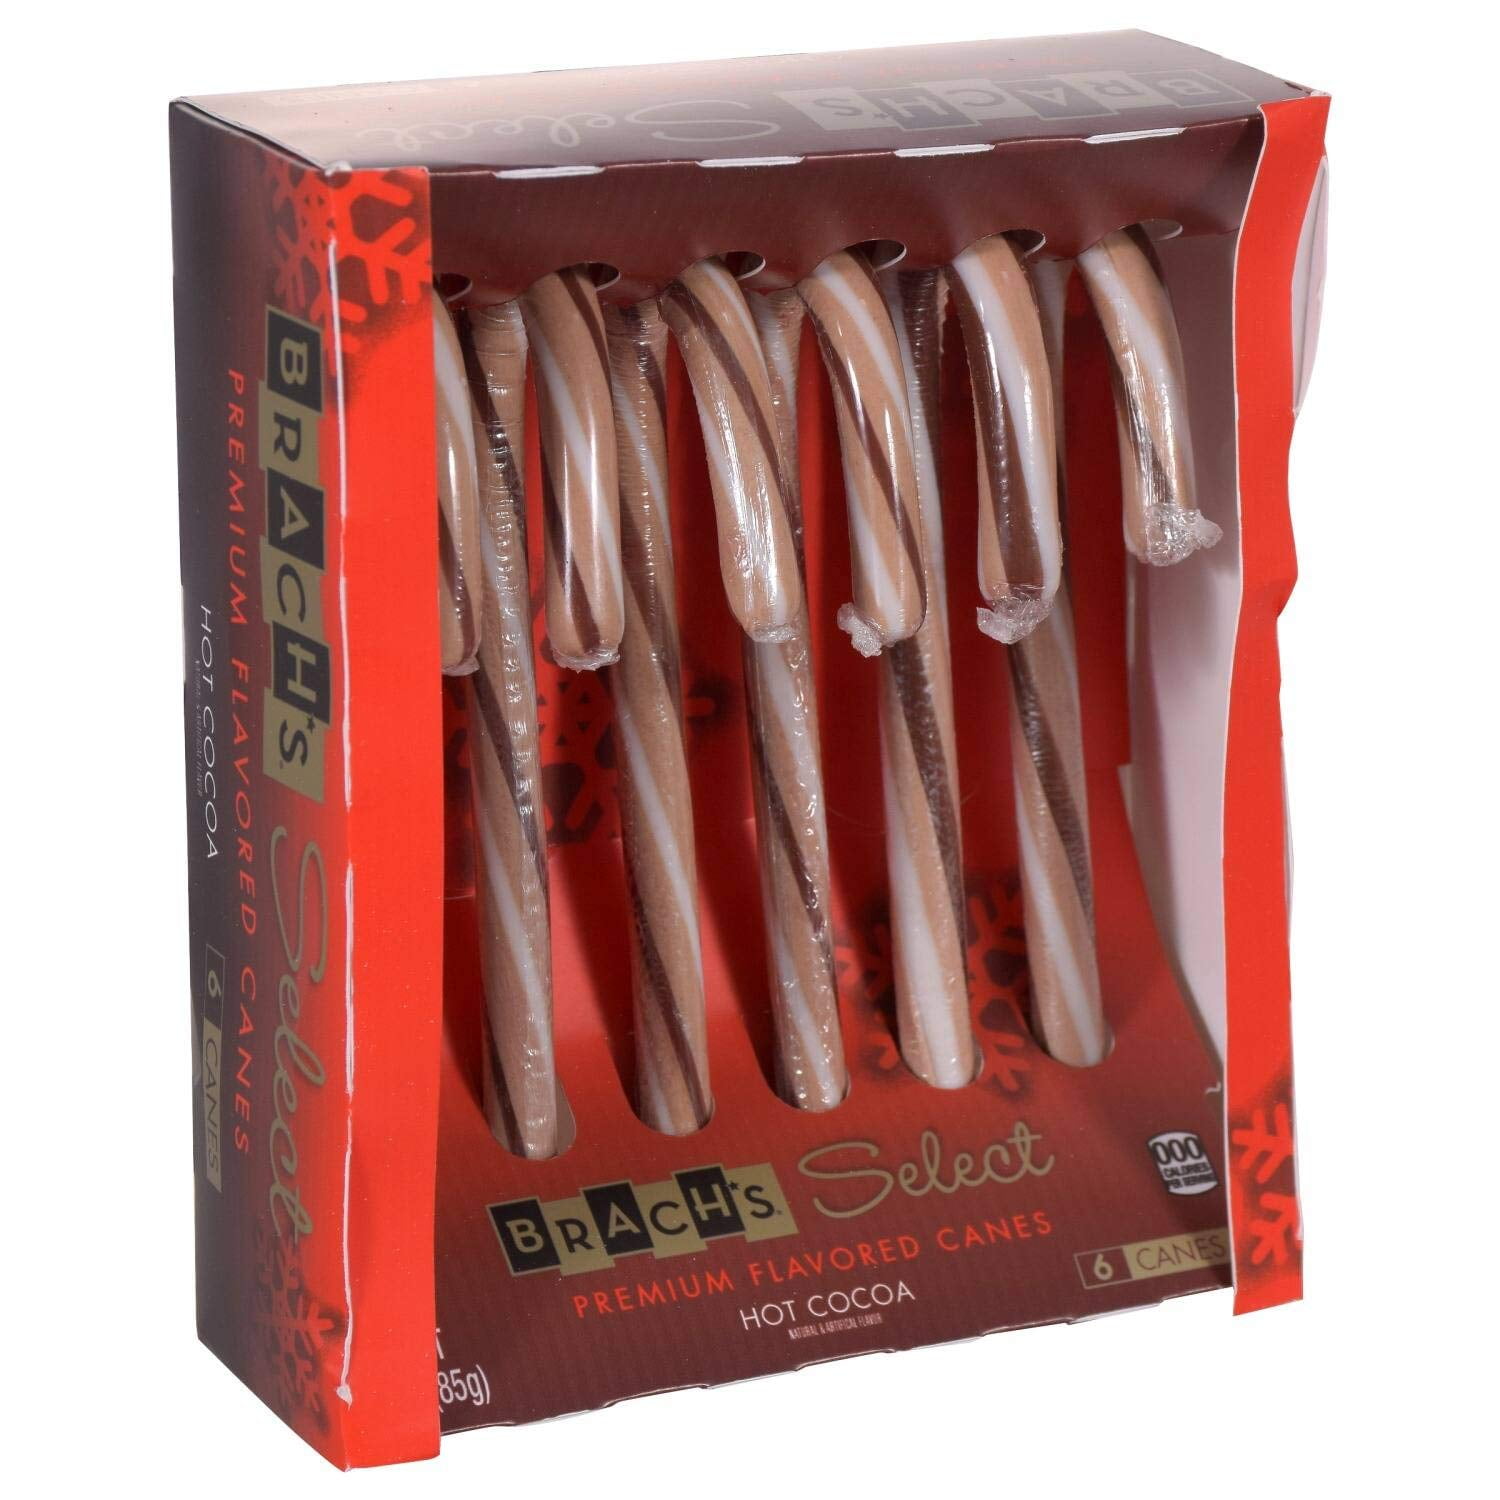 SPOTTED: Brach's Holiday Heat Sweet & Spicy Canes - The Impulsive Buy